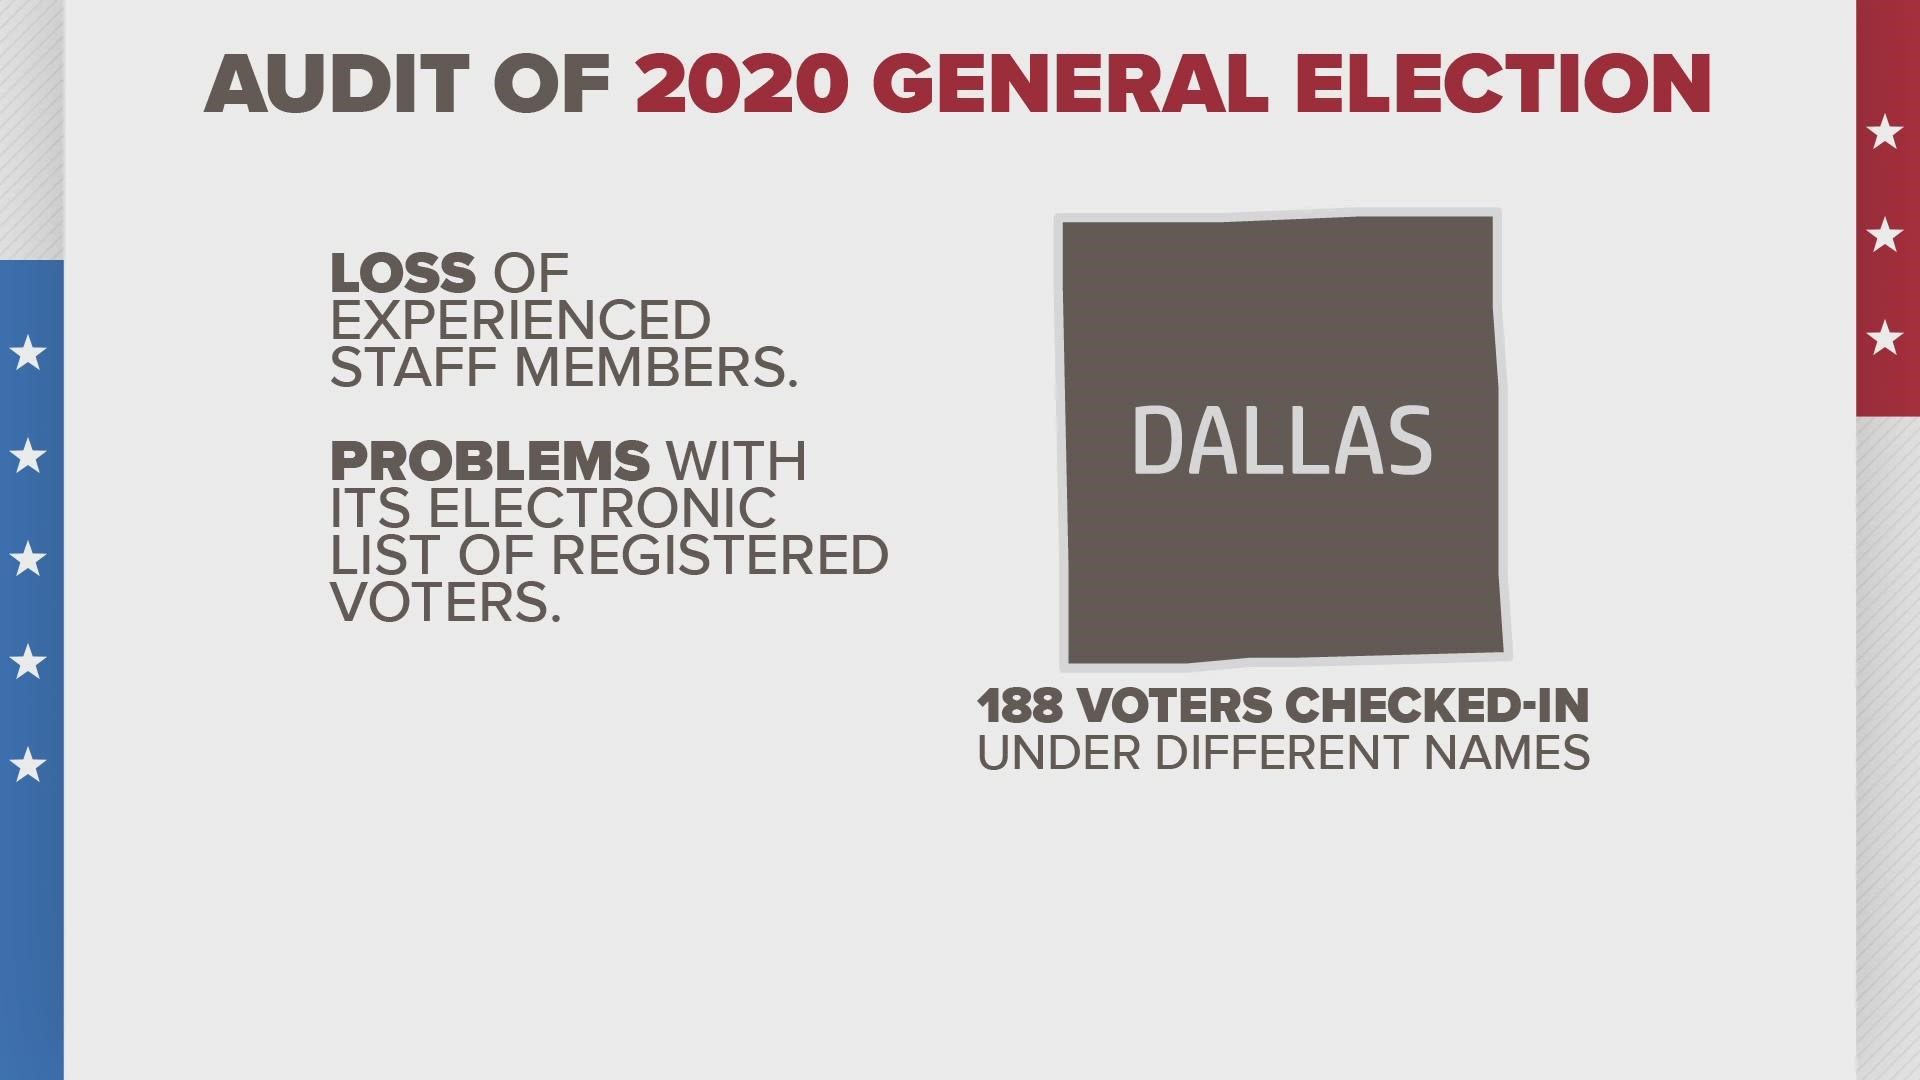 The Texas Secretary of State office had ordered a full forensic audit of the 2020 general election in certain counties.